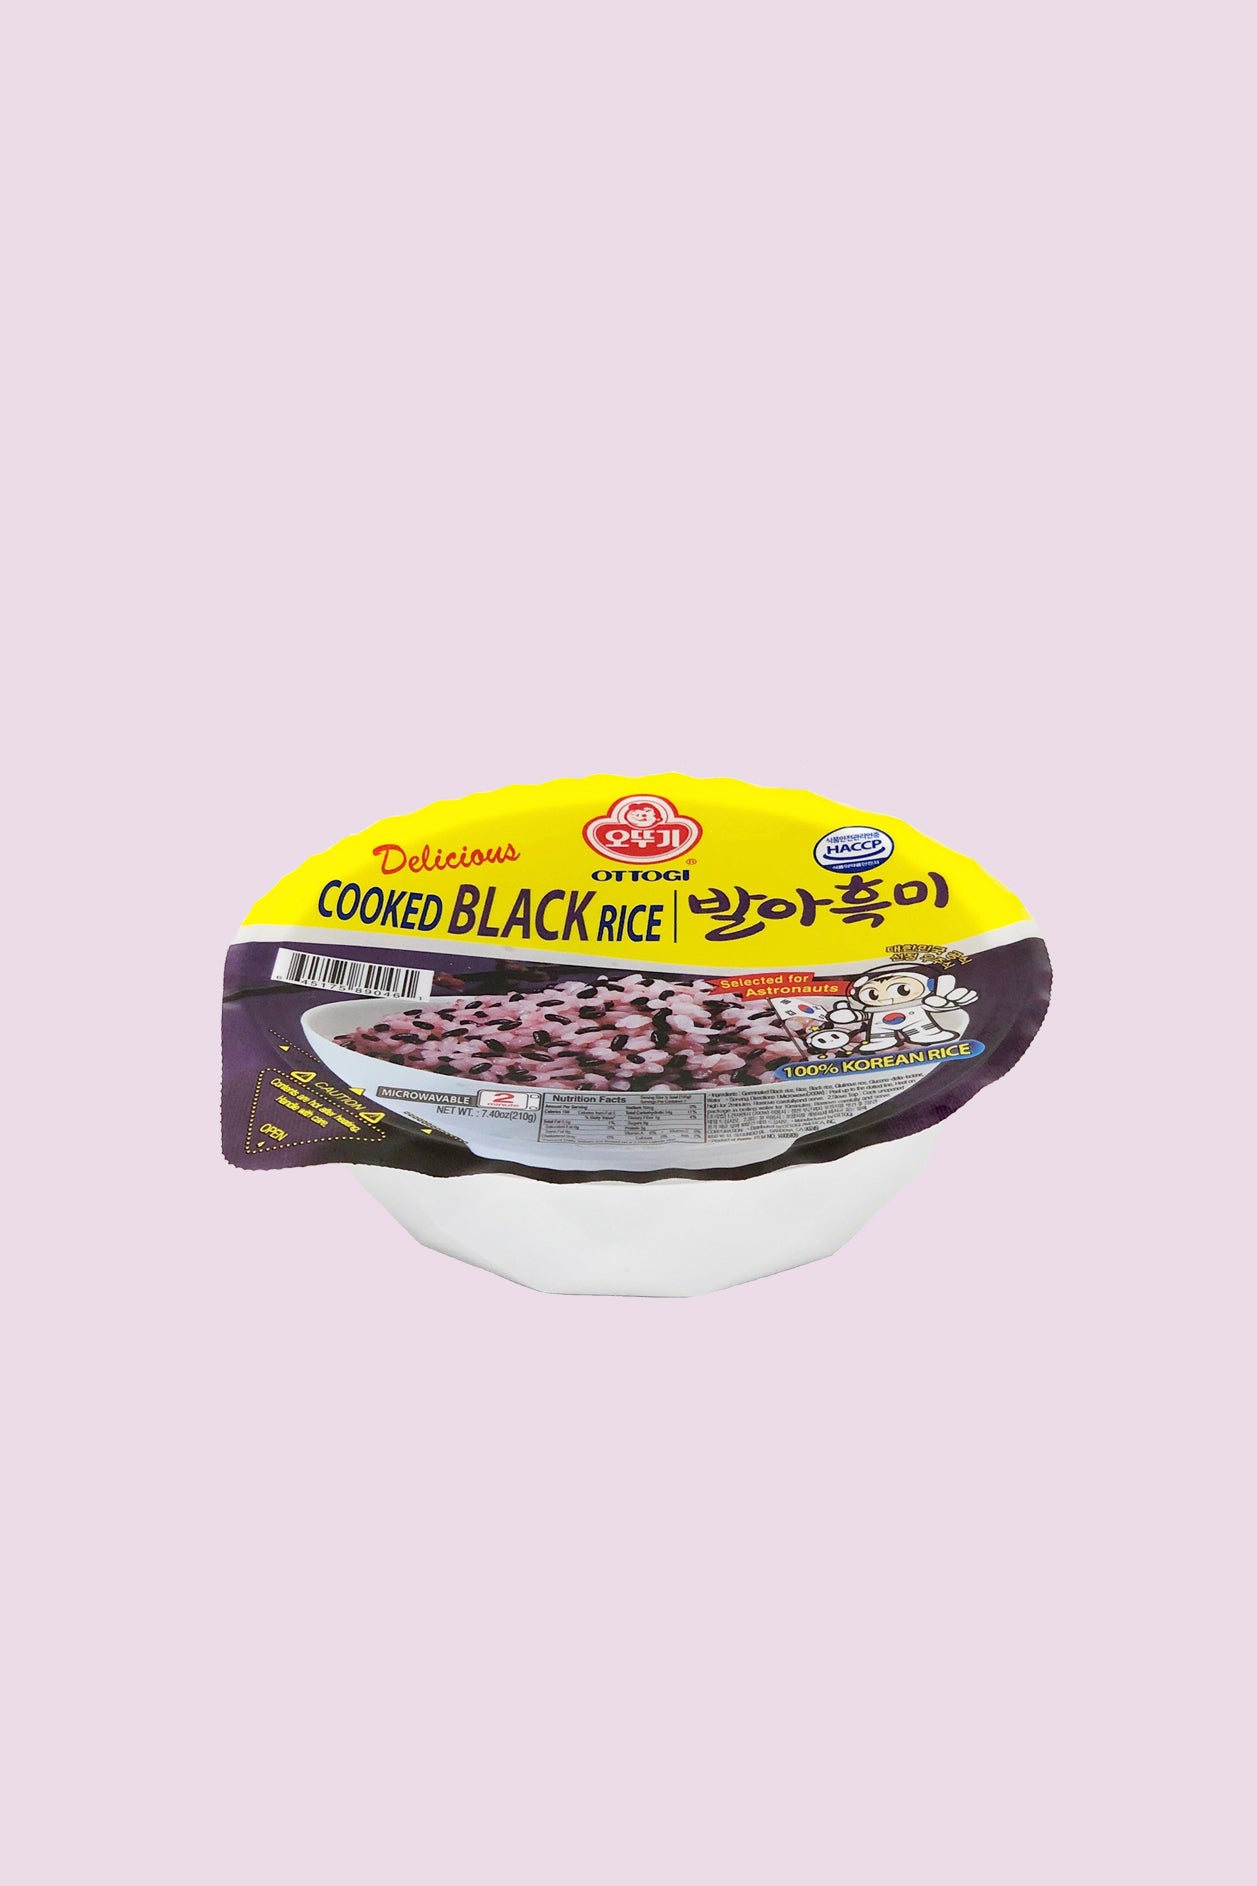 Delicious Cooked Rice 3PK